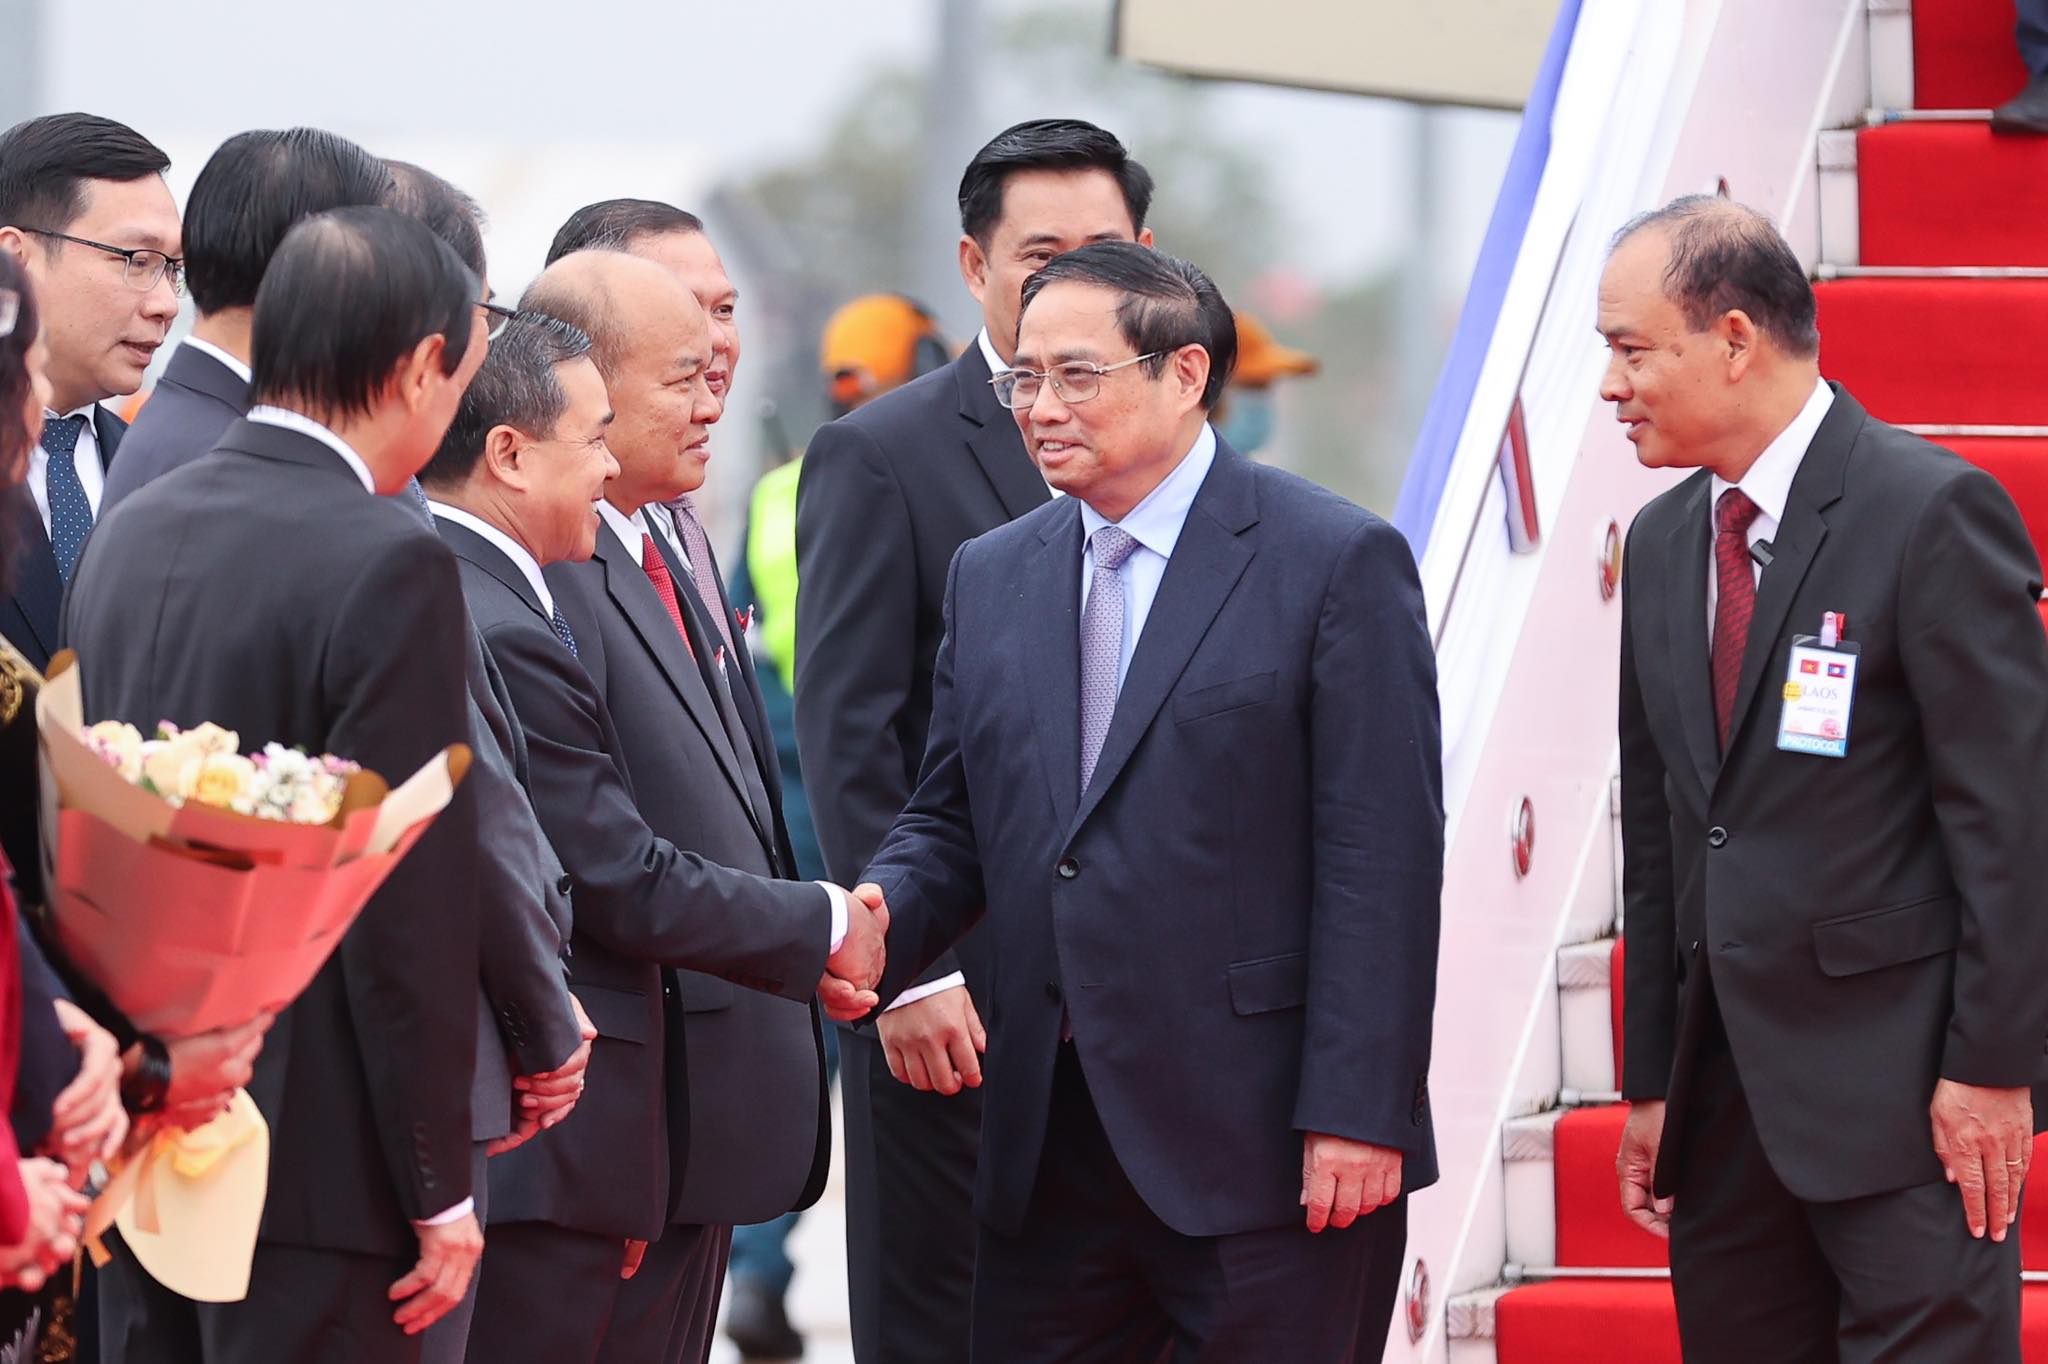 Vietnamese Prime Minister Pham Minh Chinh is welcomed at Wattay International Airport in Vientiane, Laos, January 11, 2022. Photo: Nhat Bac / Tuoi Tre